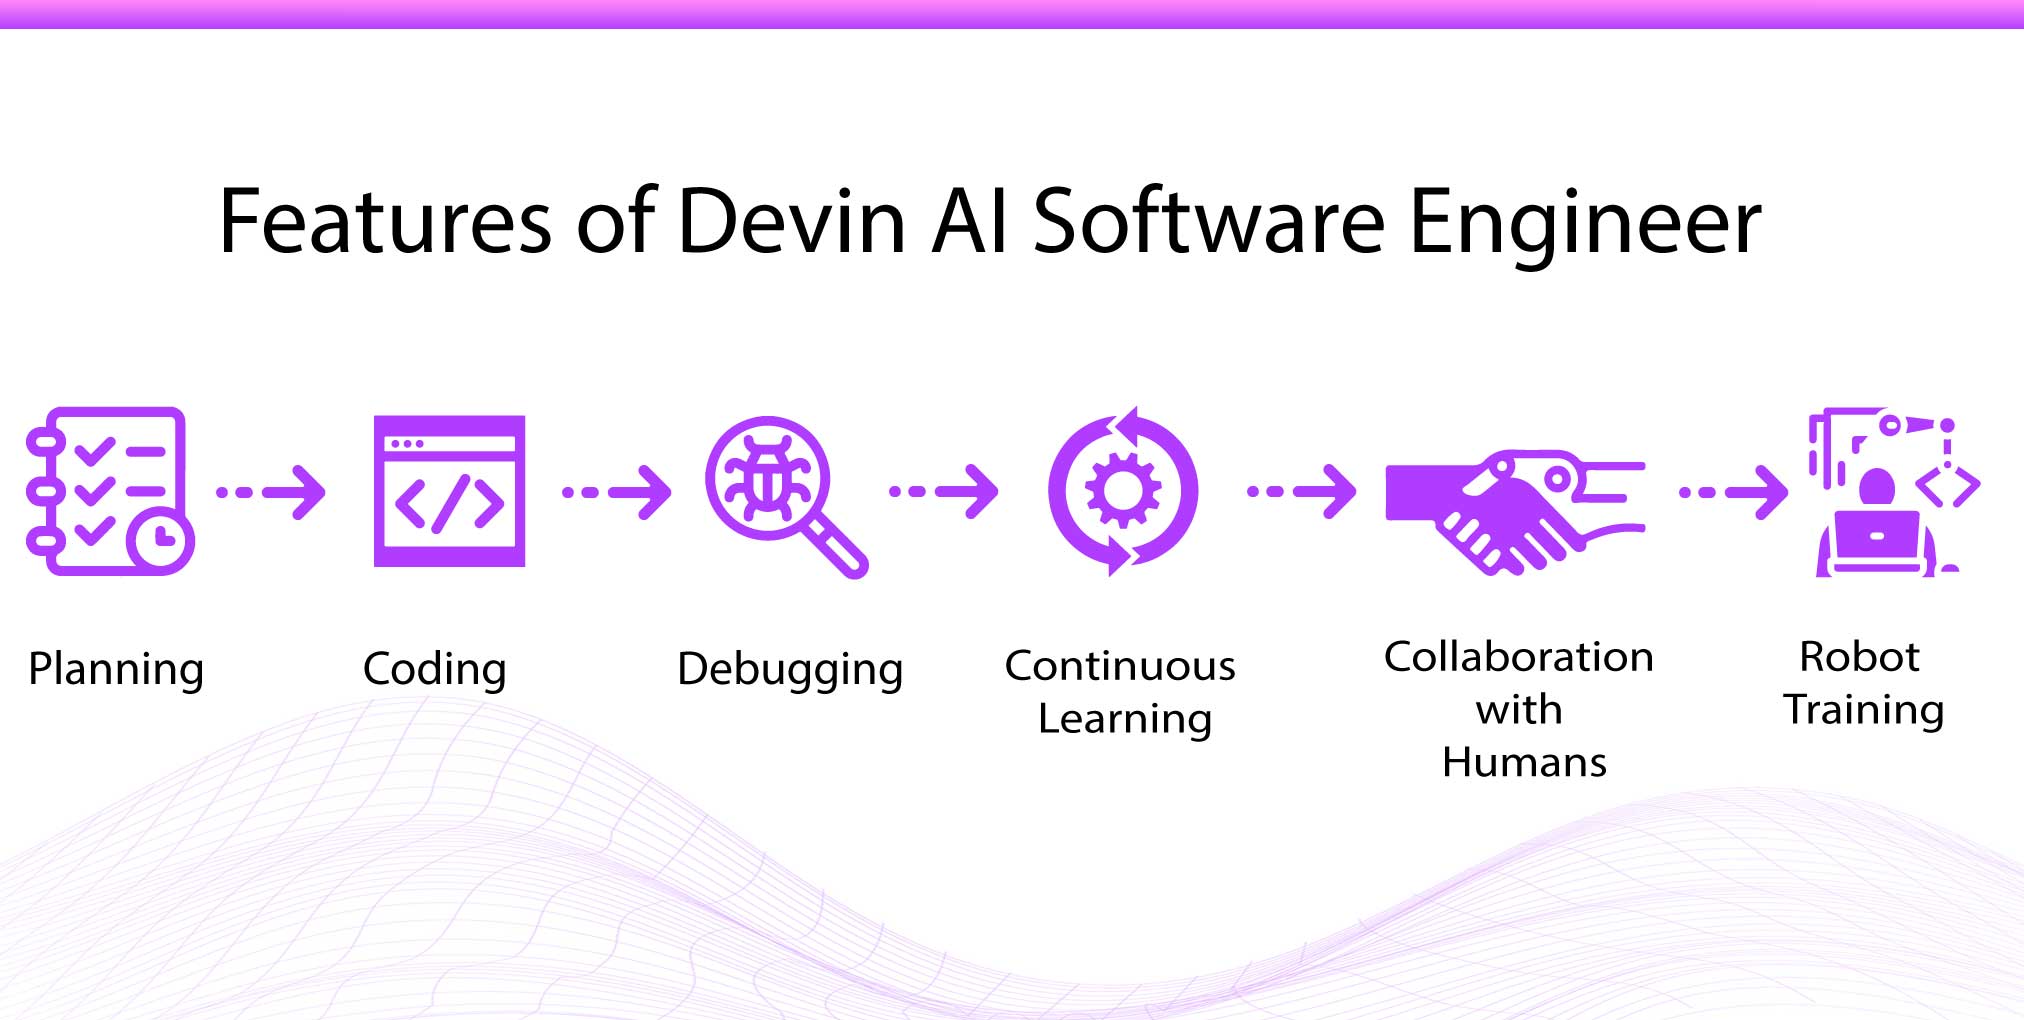 Features of Devin AI Software Engineer